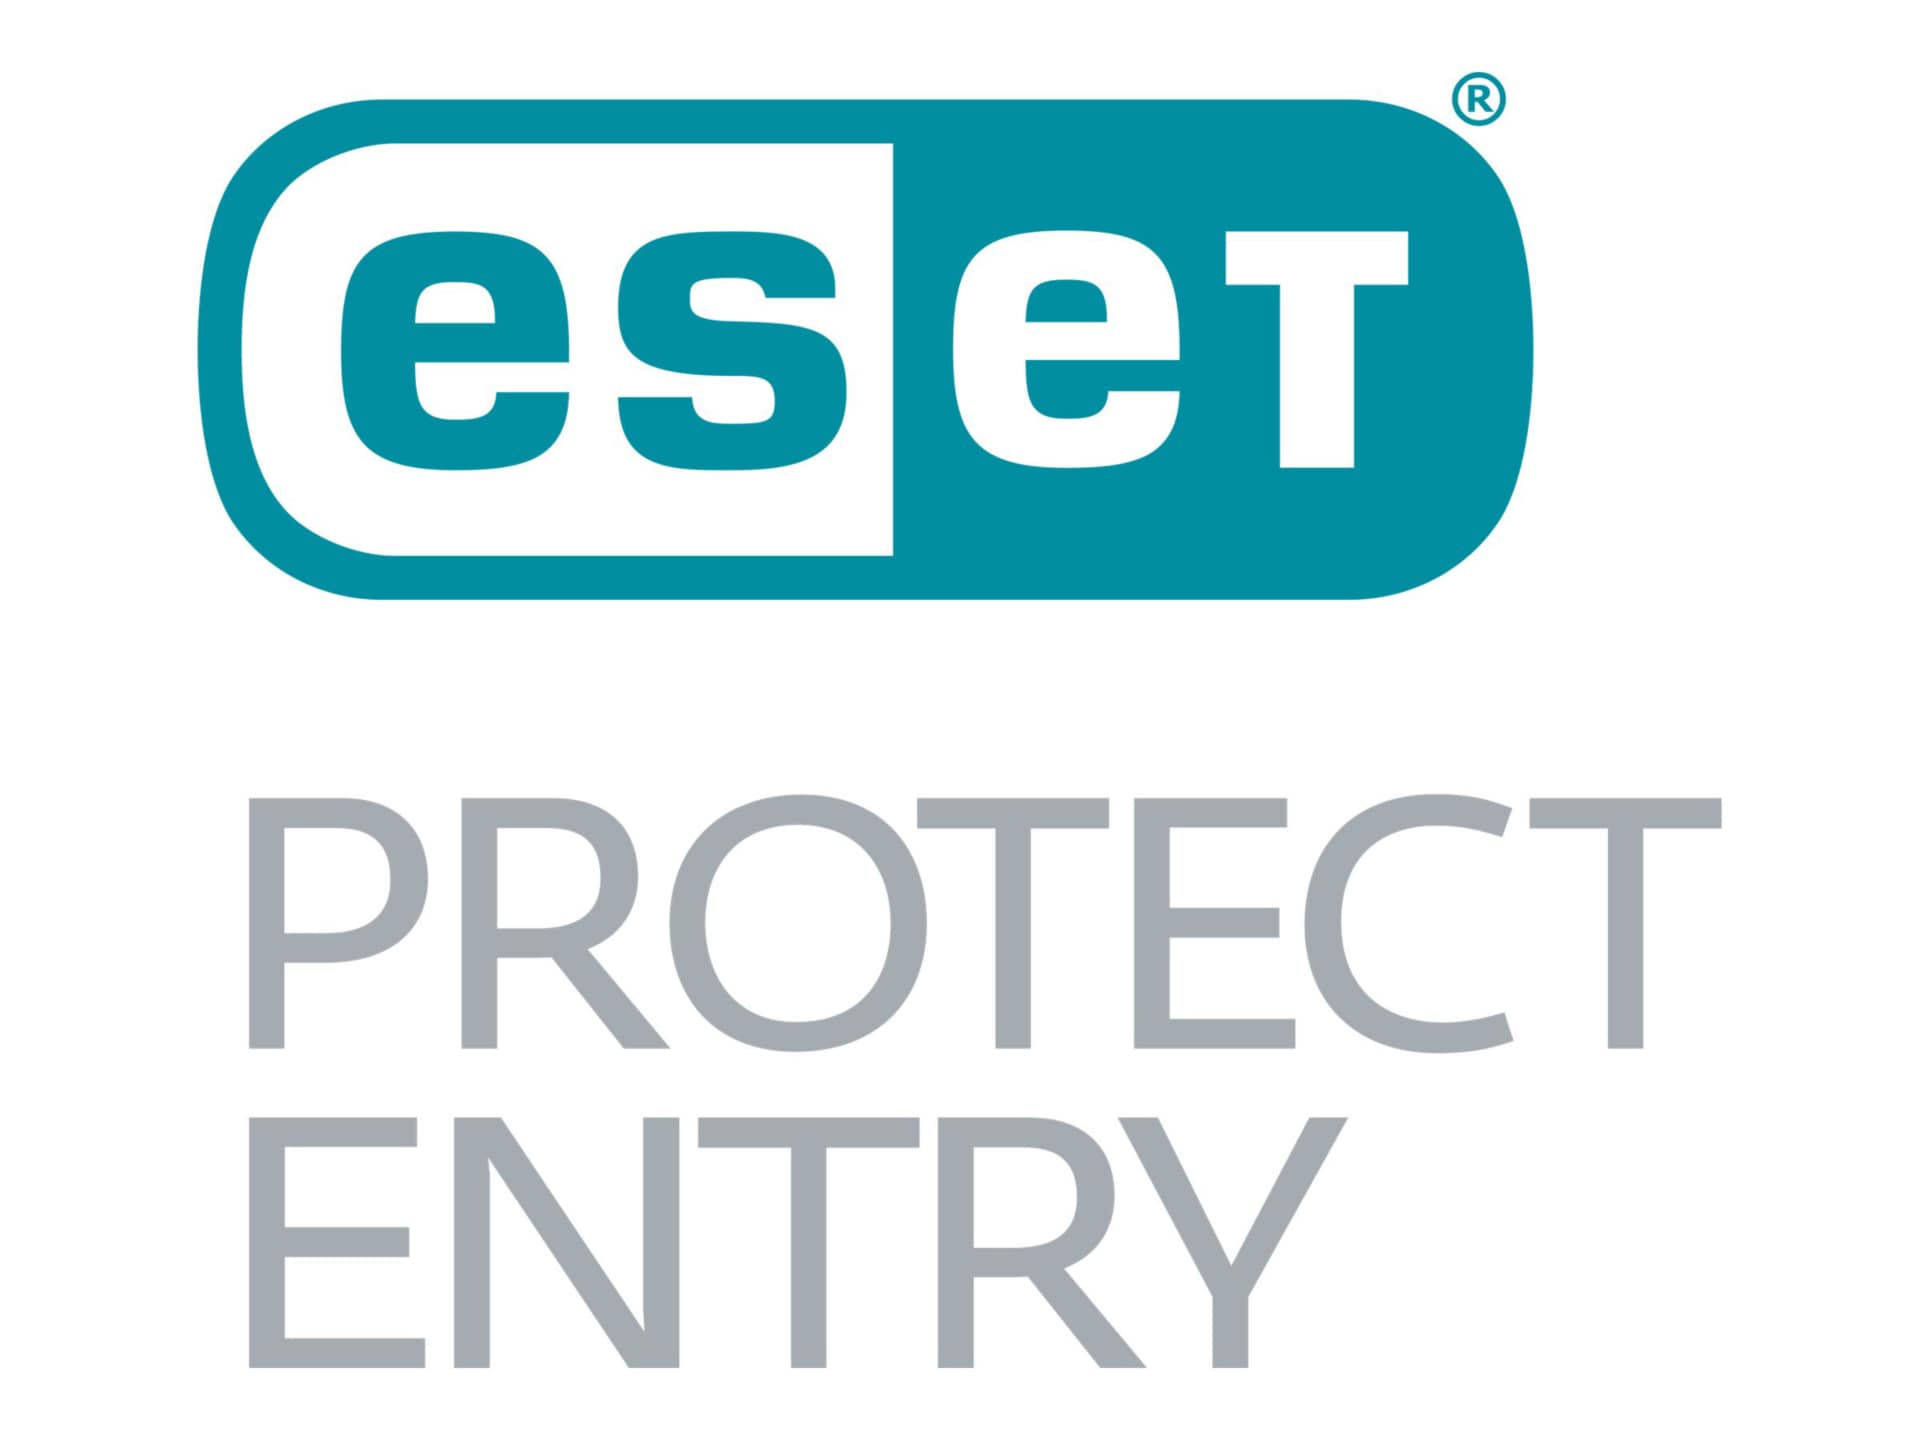 ESET PROTECT Entry - subscription license renewal (1 year) - 1 device